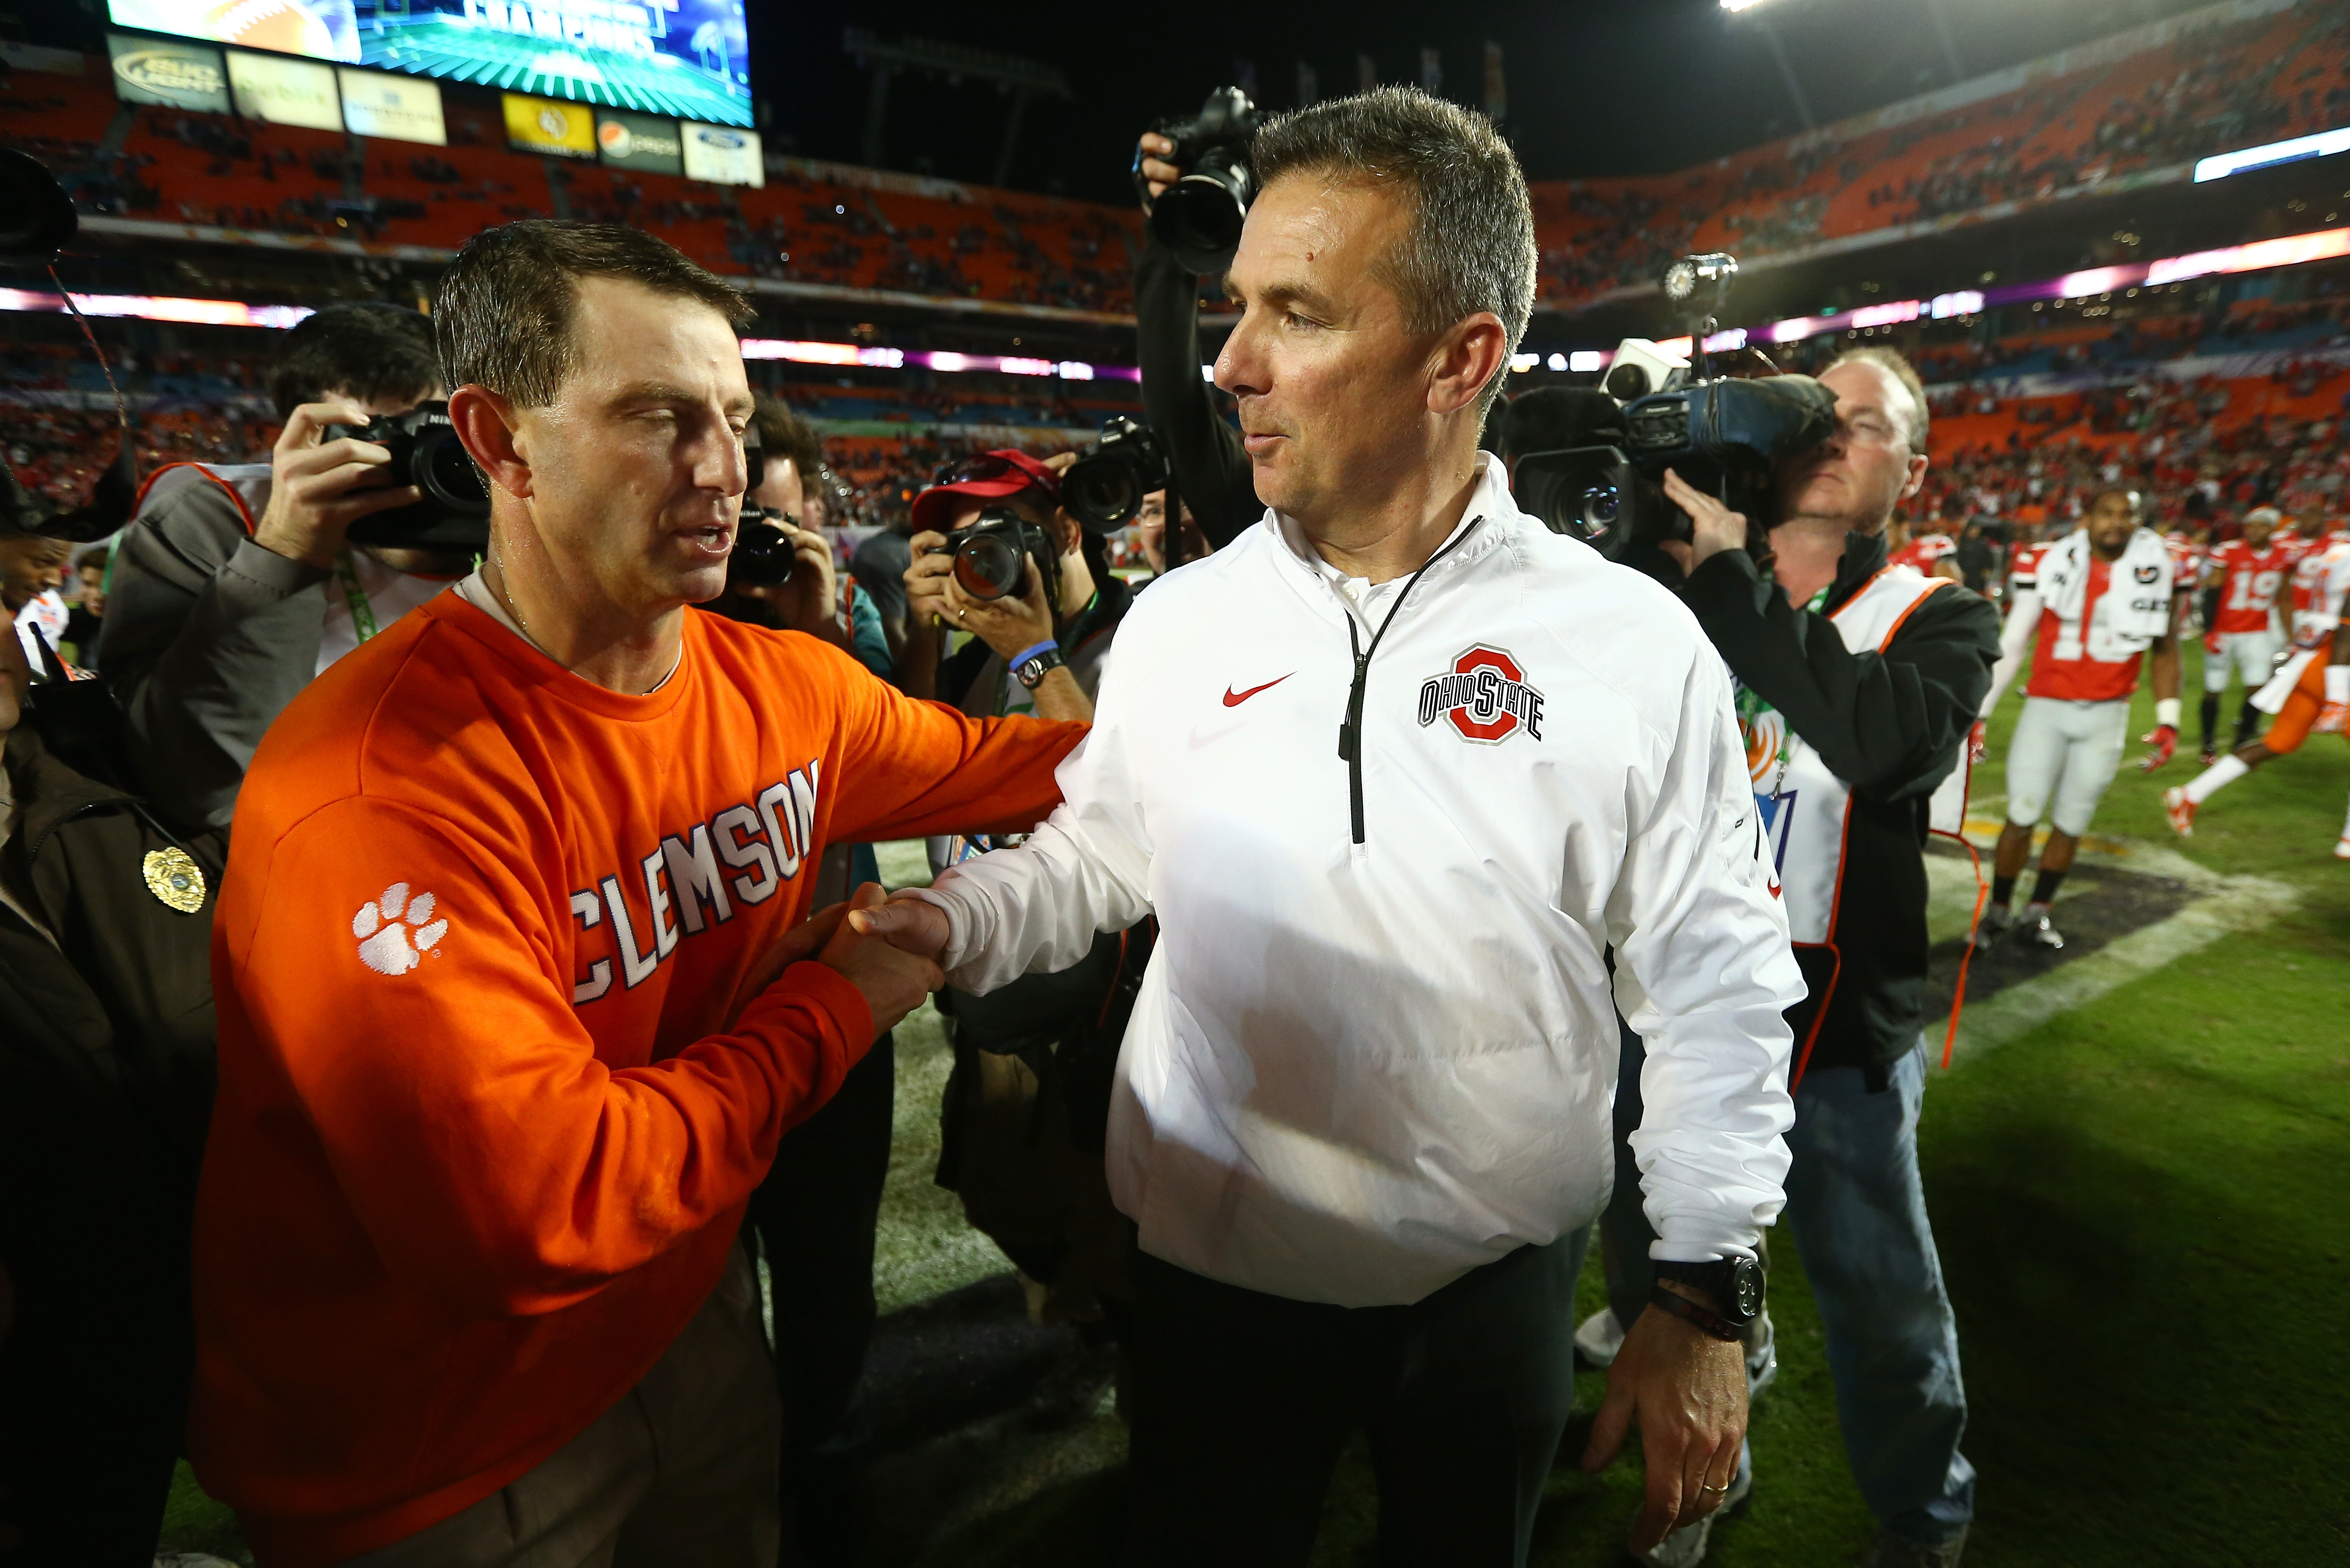 Ranking the Top 25 College Football Coaches Heading into 2014